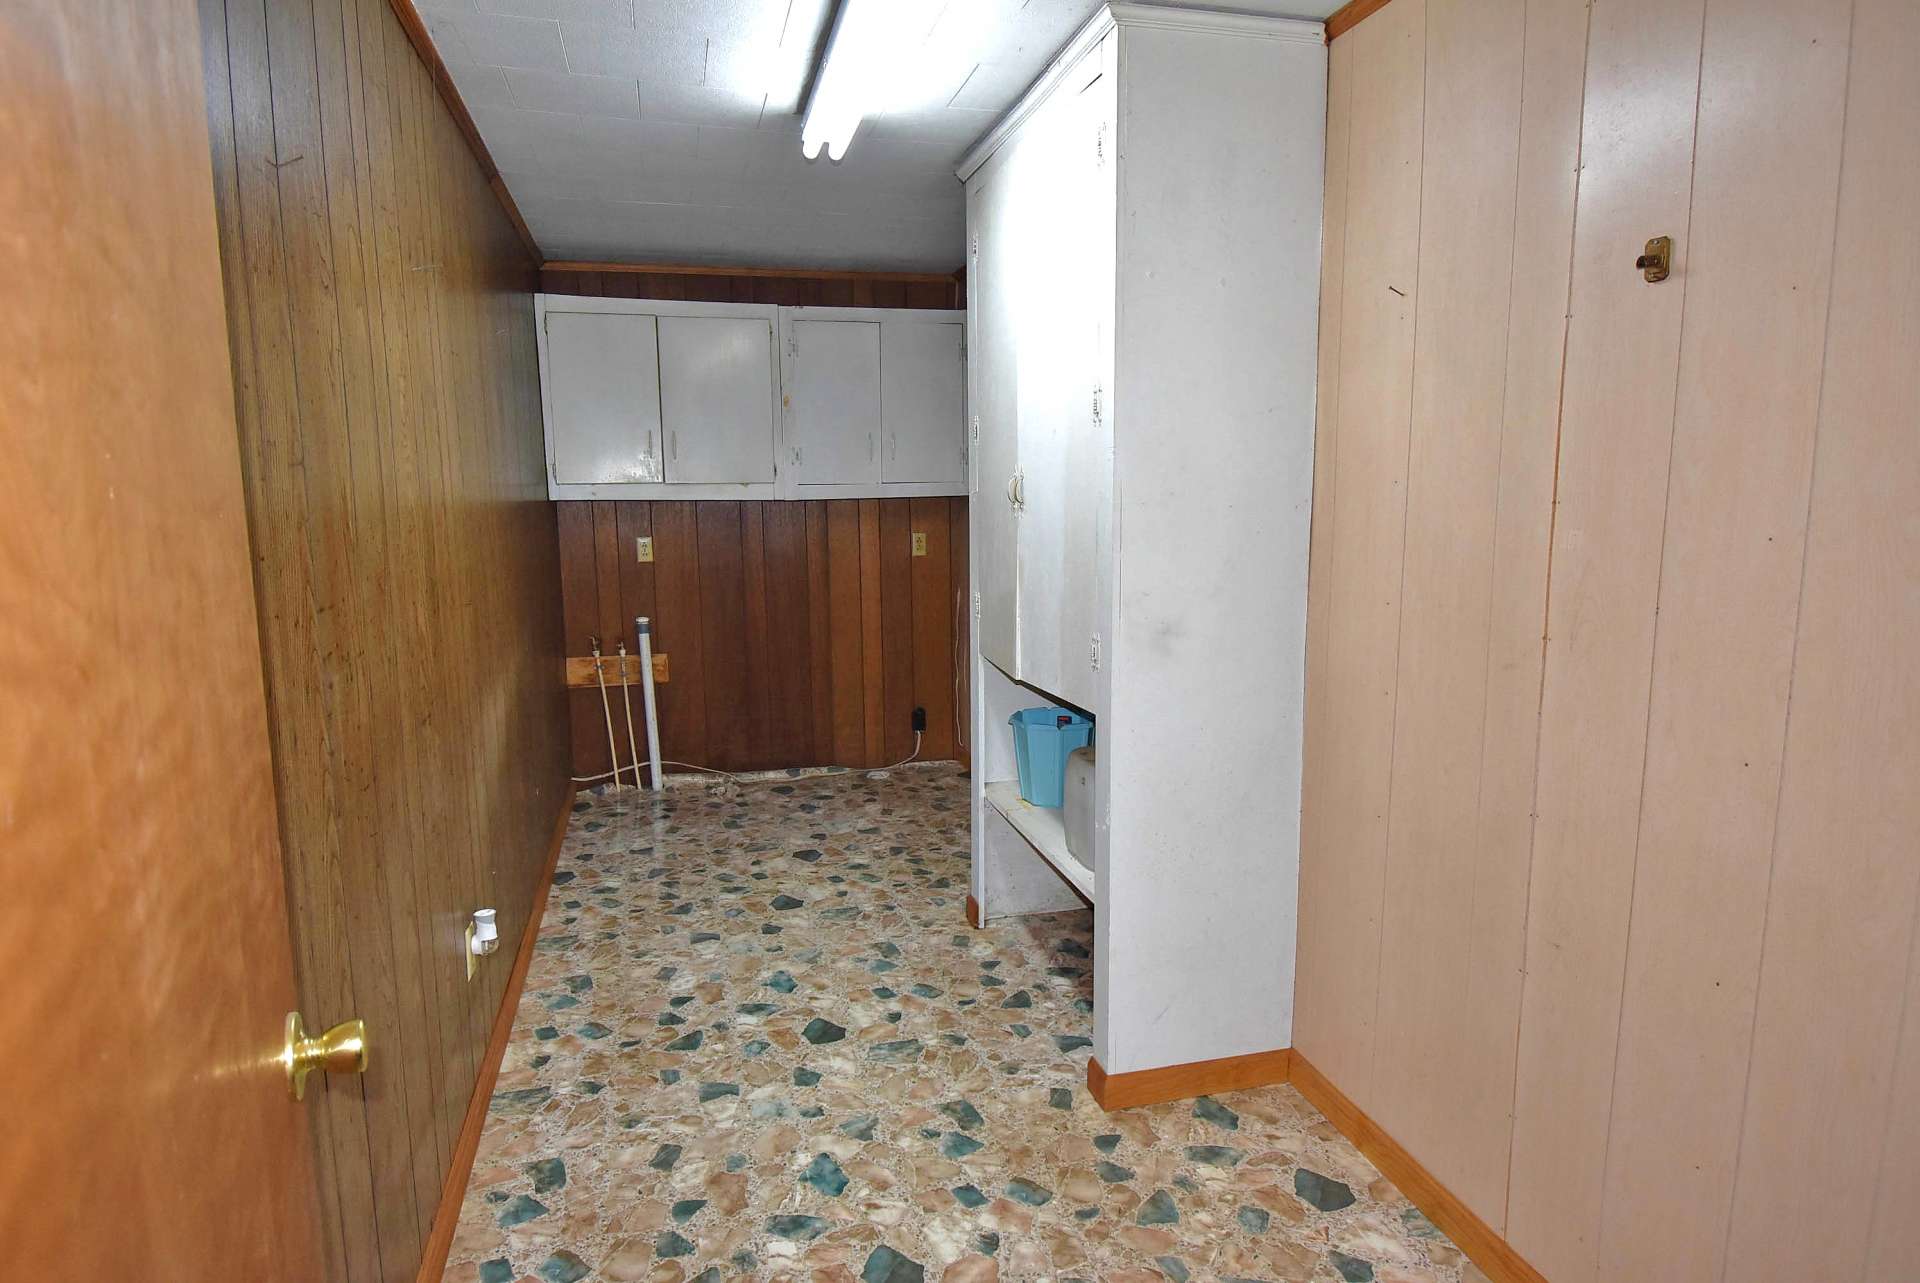 Convenient one level living that includes this  laundry room with extra storage space.